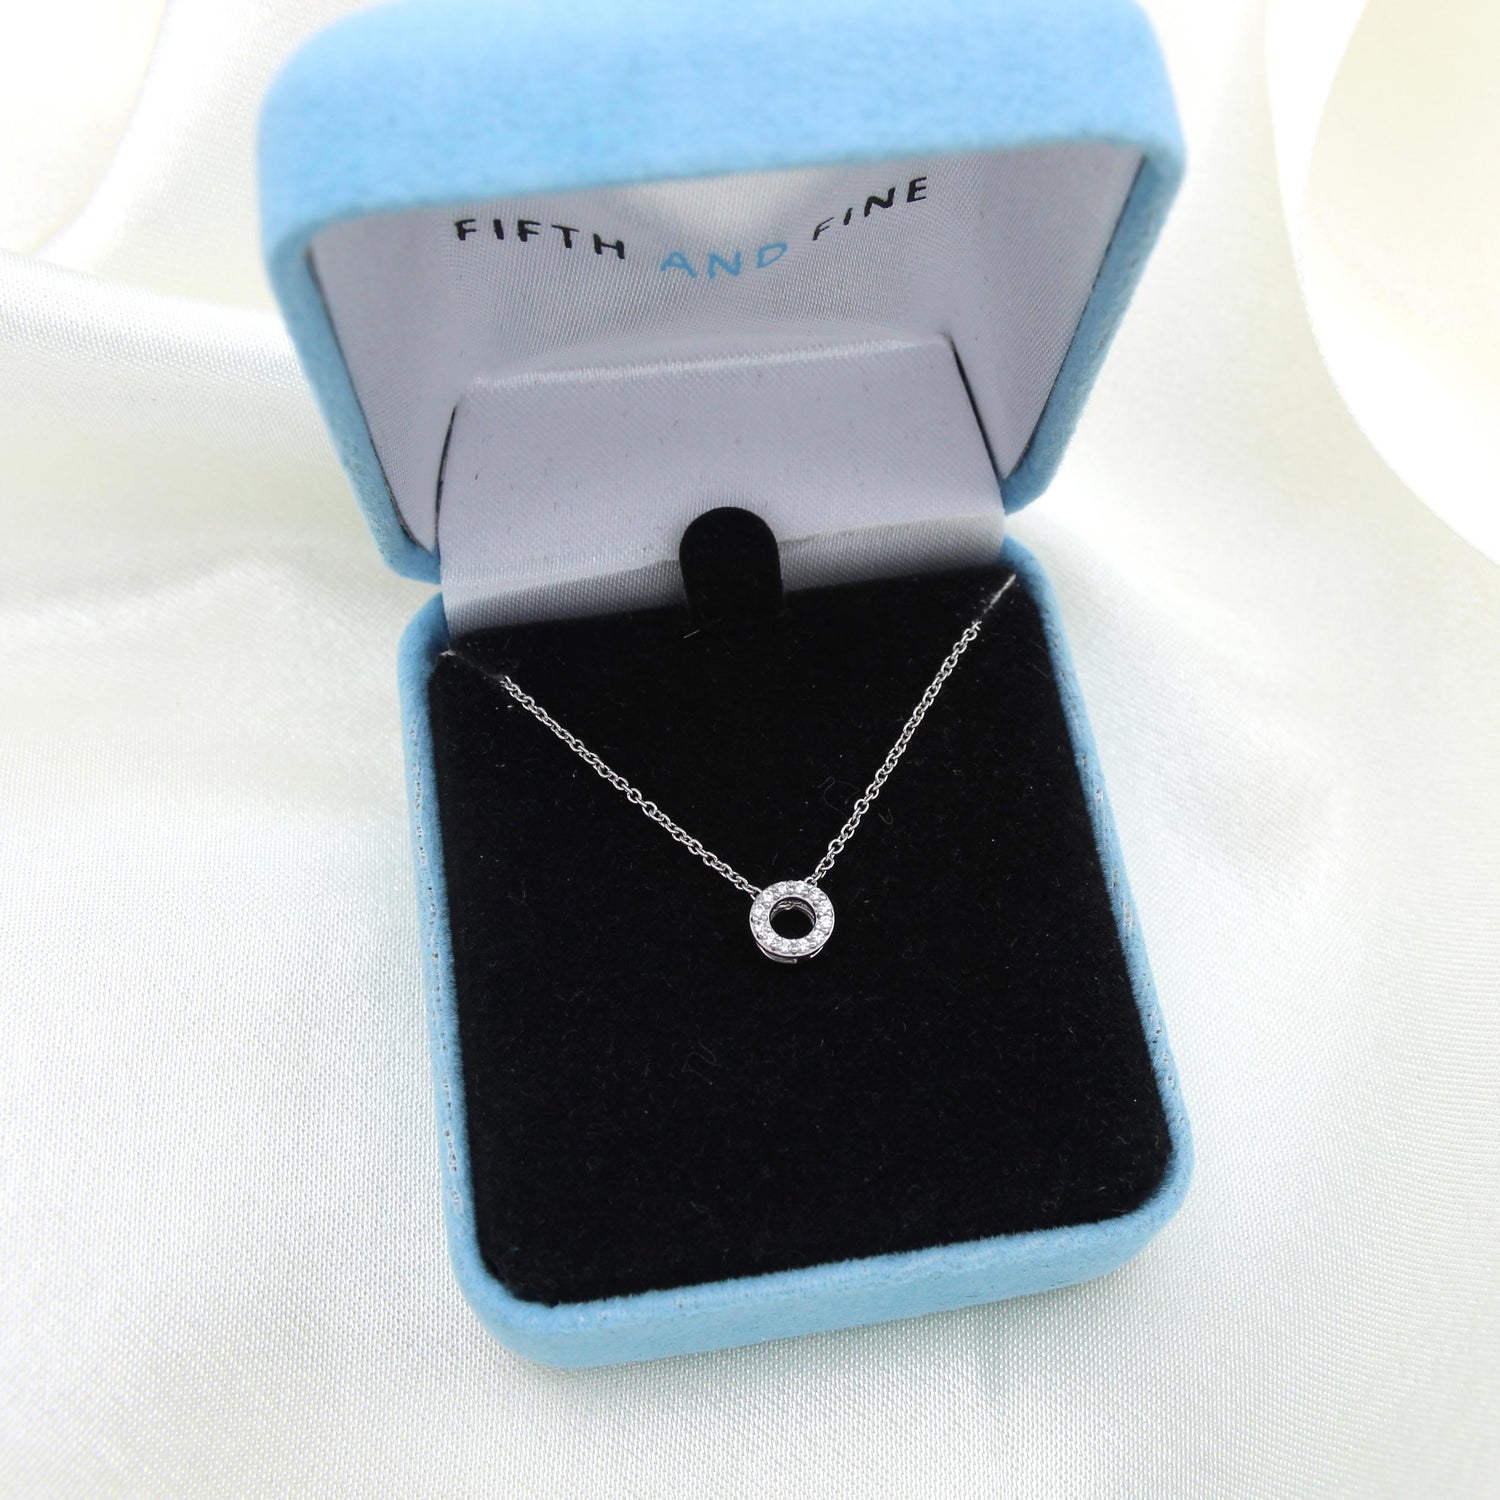 Eternity Circle 1/20 Cttw Natural Diamond Pendant Necklace set in 925 Sterling Silver